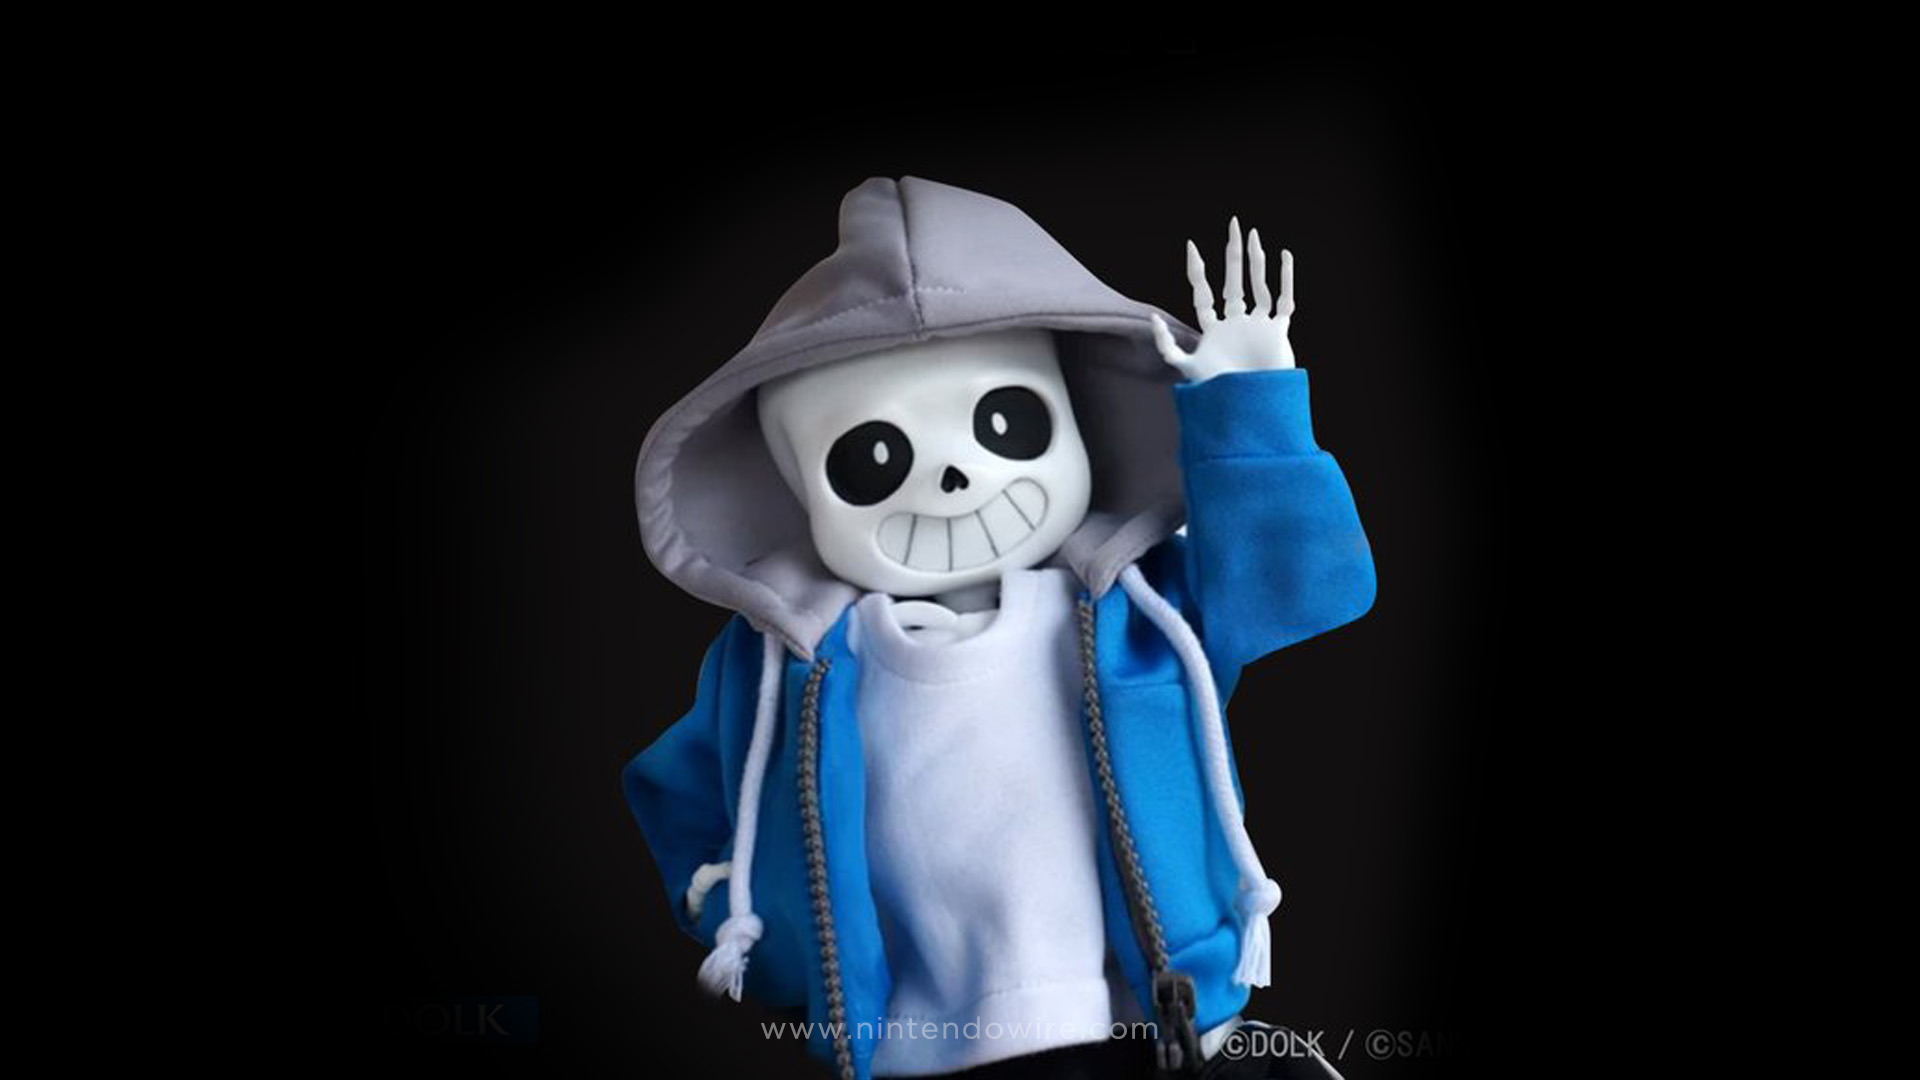 Have a good time with this dress-upable Sans doll | Nintendo Wire